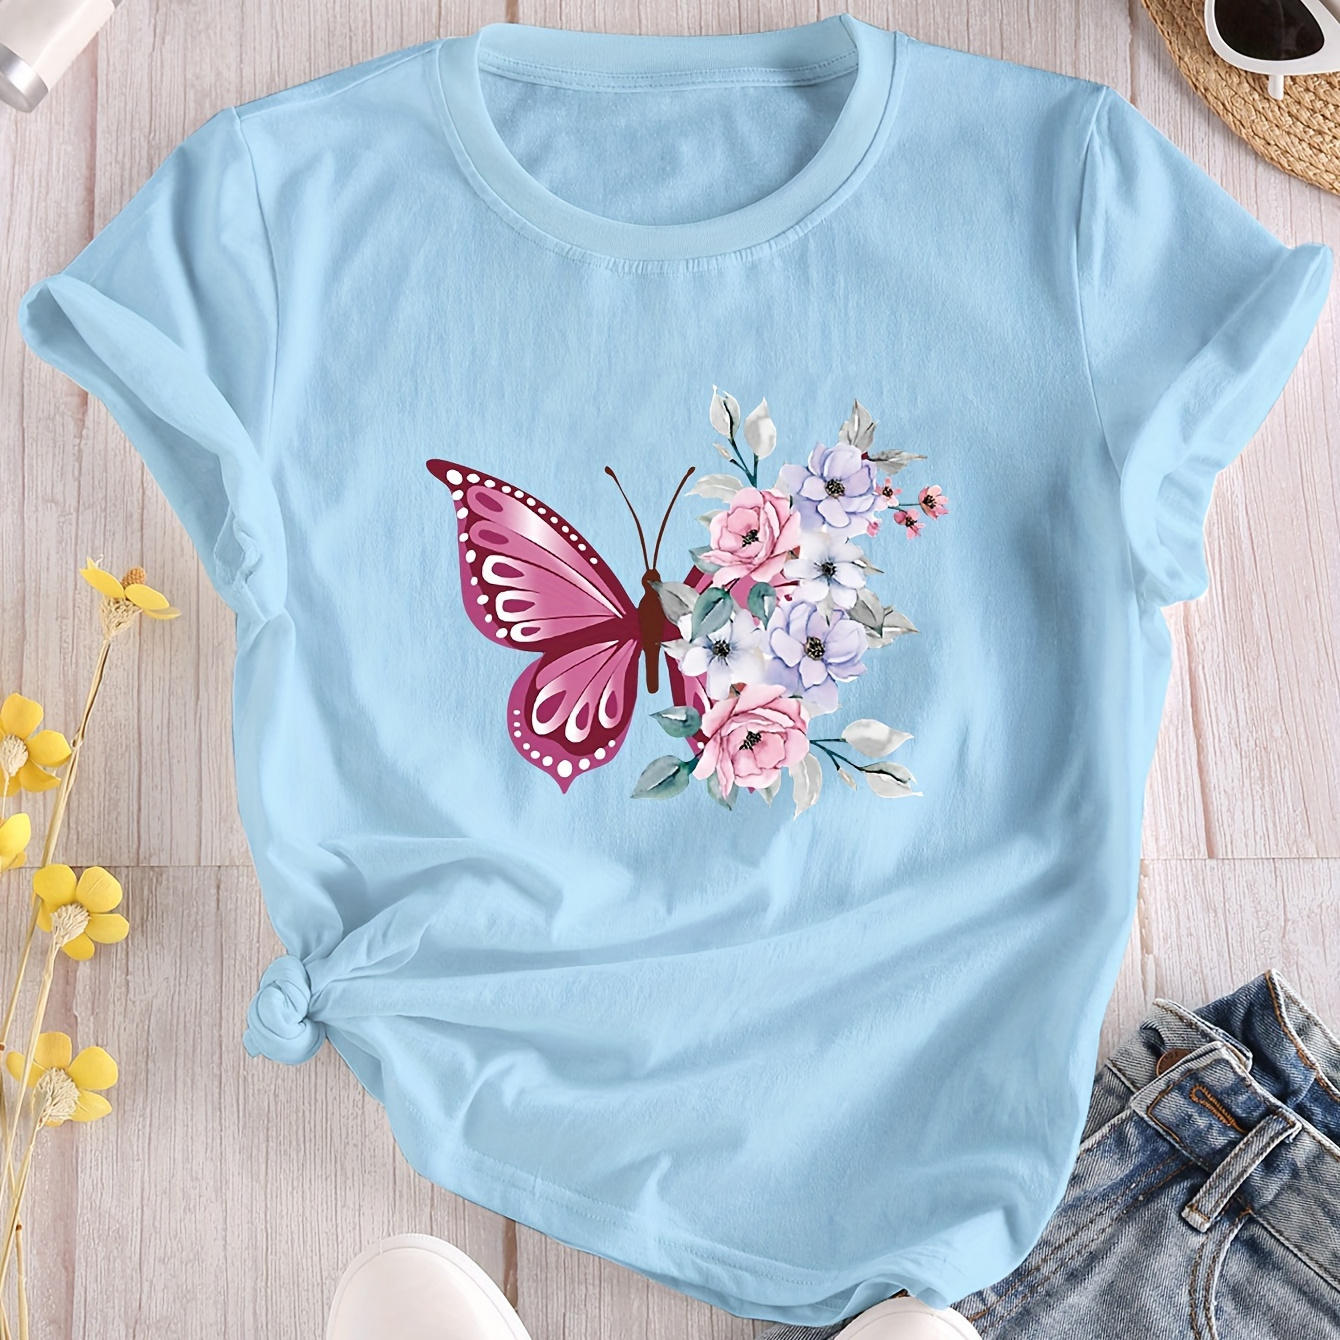 

Butterfly & Floral Sprint Crew Neck T-shirt, Casual Short Sleeve T-shirt For Spring & Summer, Women's Clothing